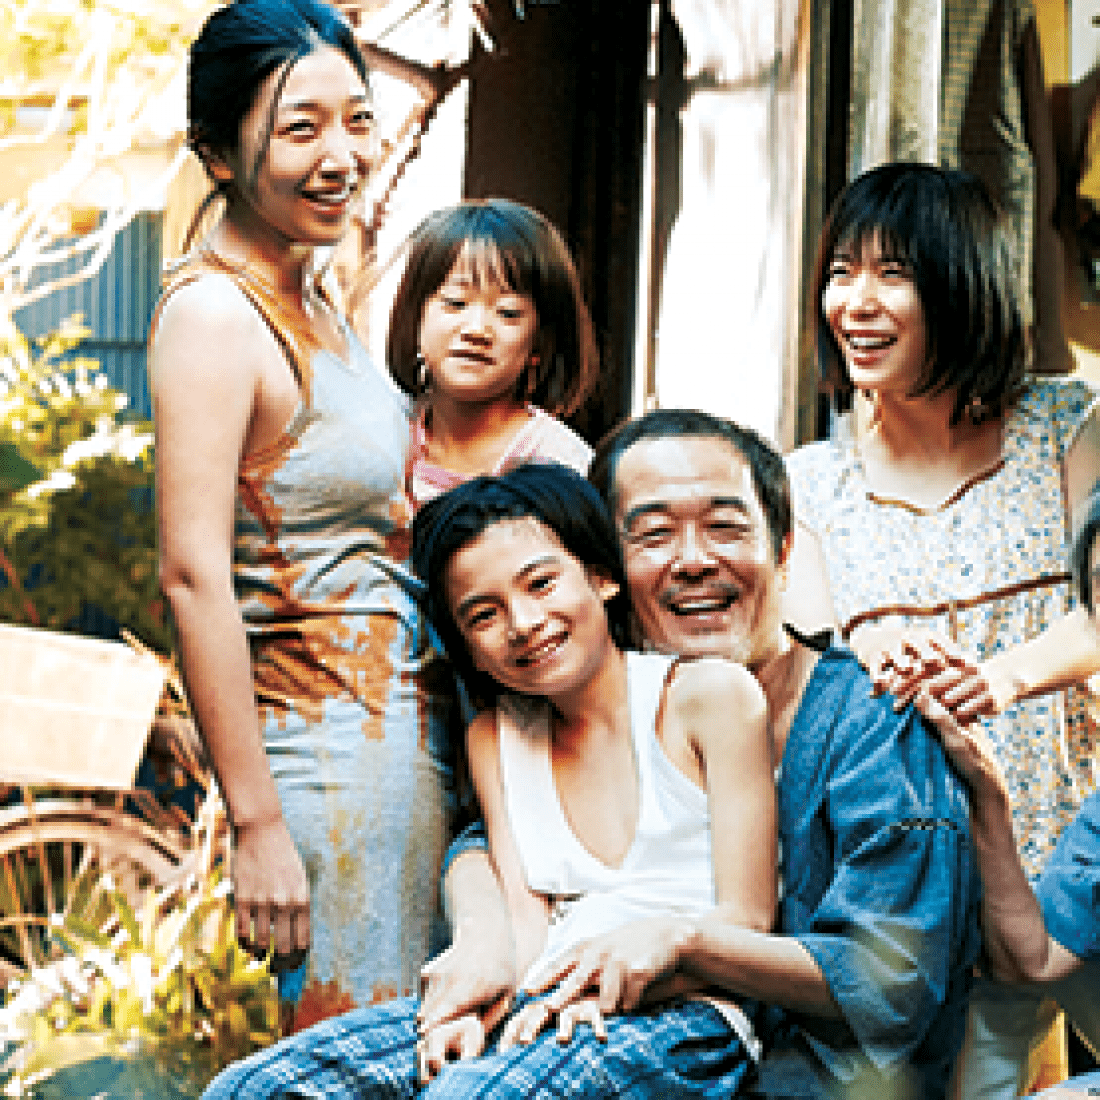 Shoplifters film photo of smiling Asian family